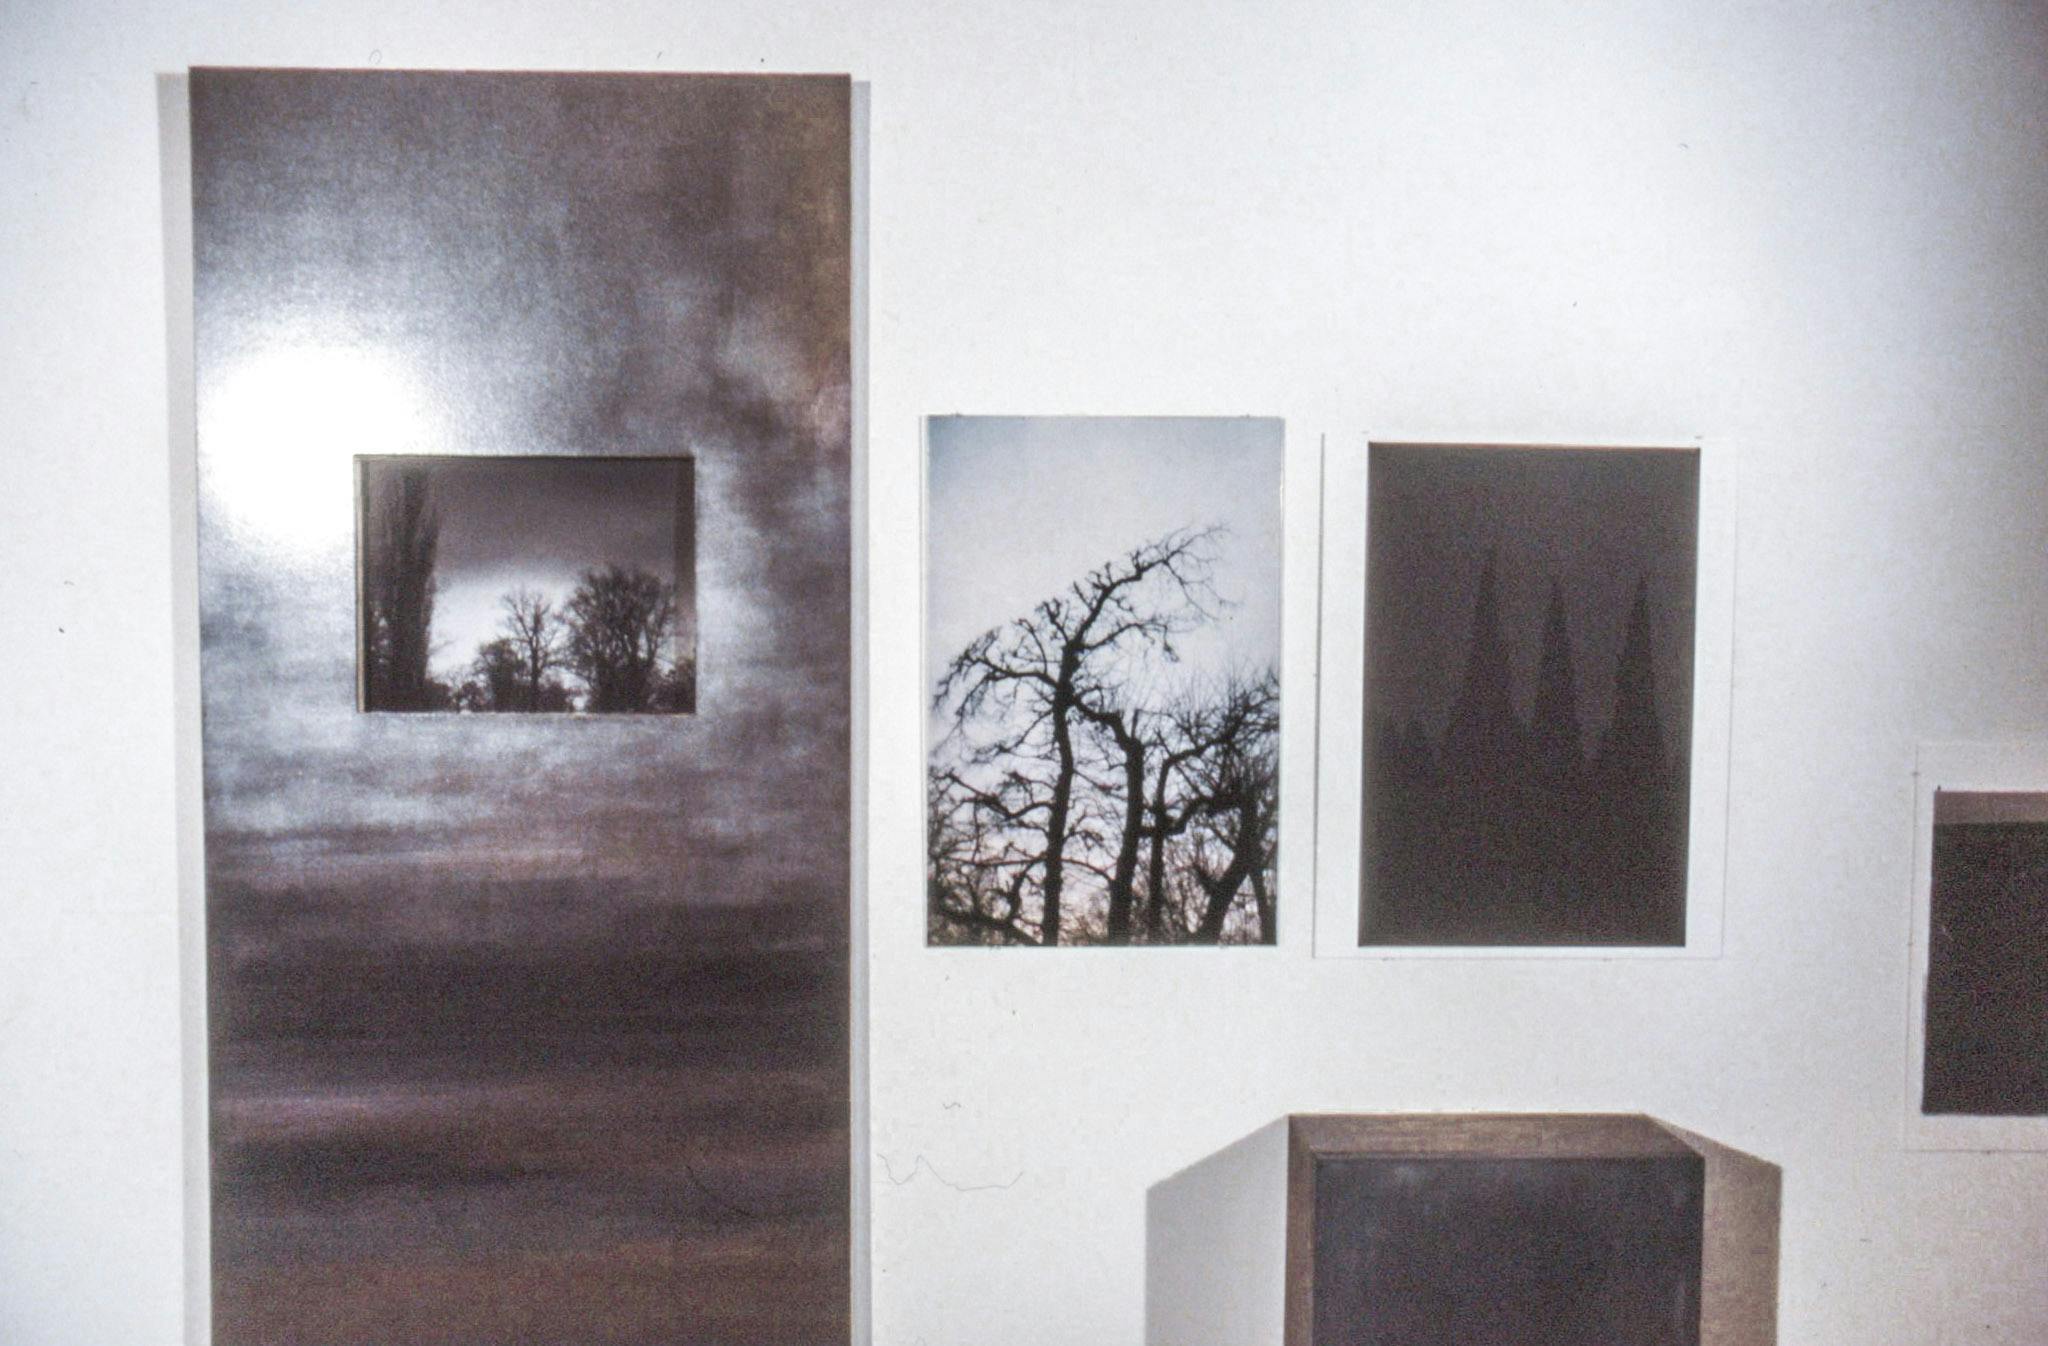 Several artworks on a white wall. 3 are photos of dark trees, 2 mounted with no frame, one in a long wood panel that is painted as a cloudy scene. At the base of the wall there is a dark wood box. 